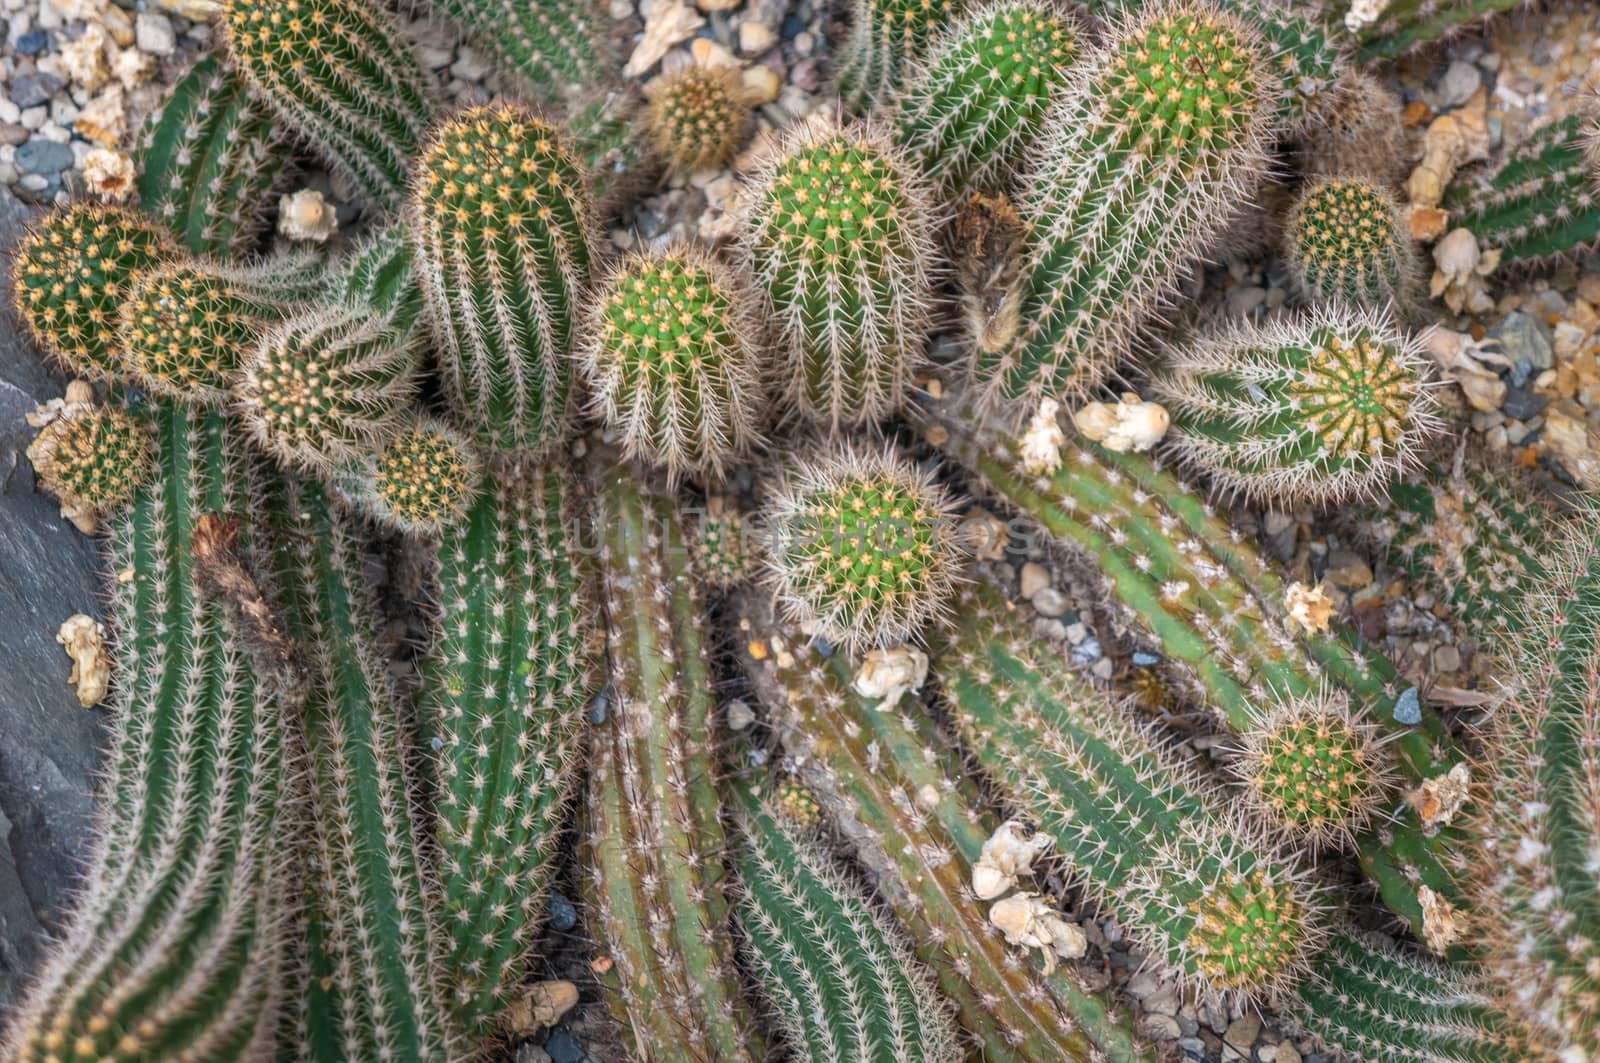 Cactus backdrop shot from above